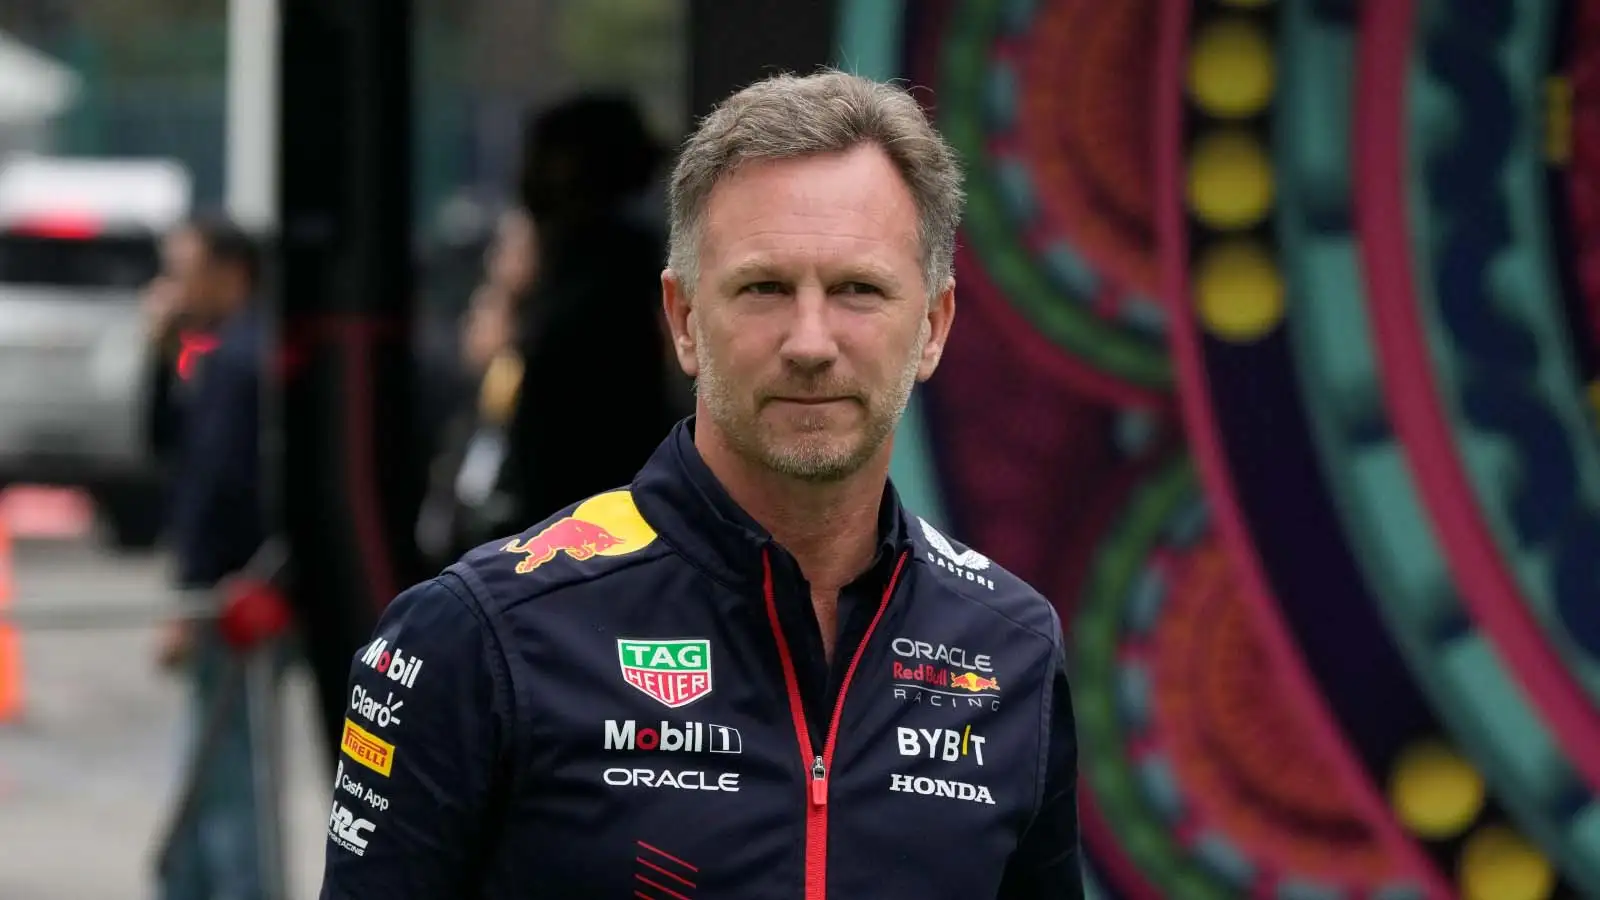 Red Bull boss Christian Horner arrives at the Mexican Grand Prix.